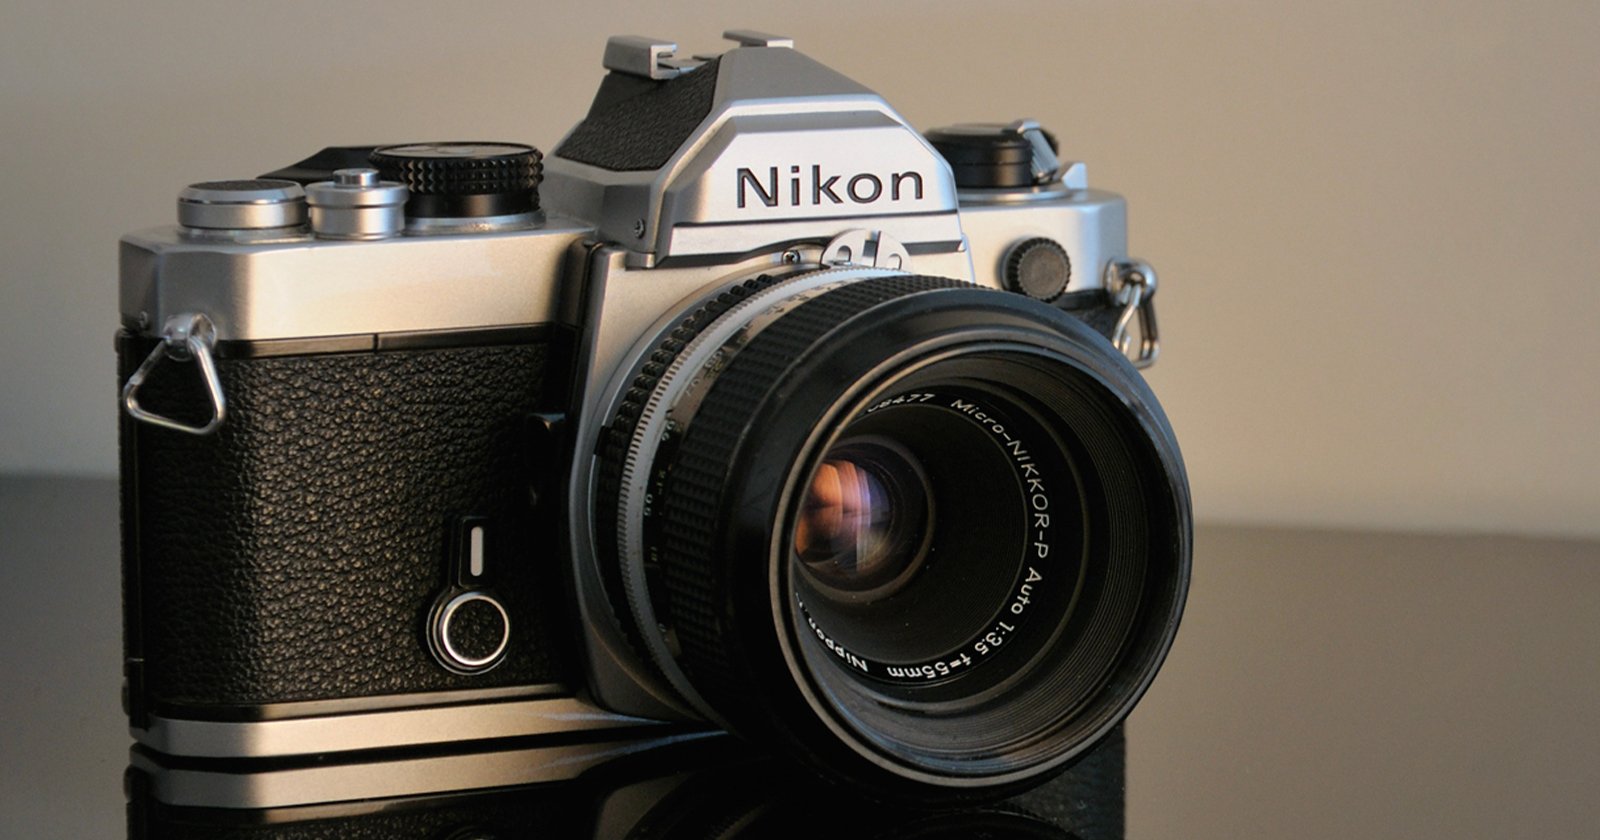 The Nikon Zfc Will Be a Retro-Inspired $1,000 APS-C Camera: Report